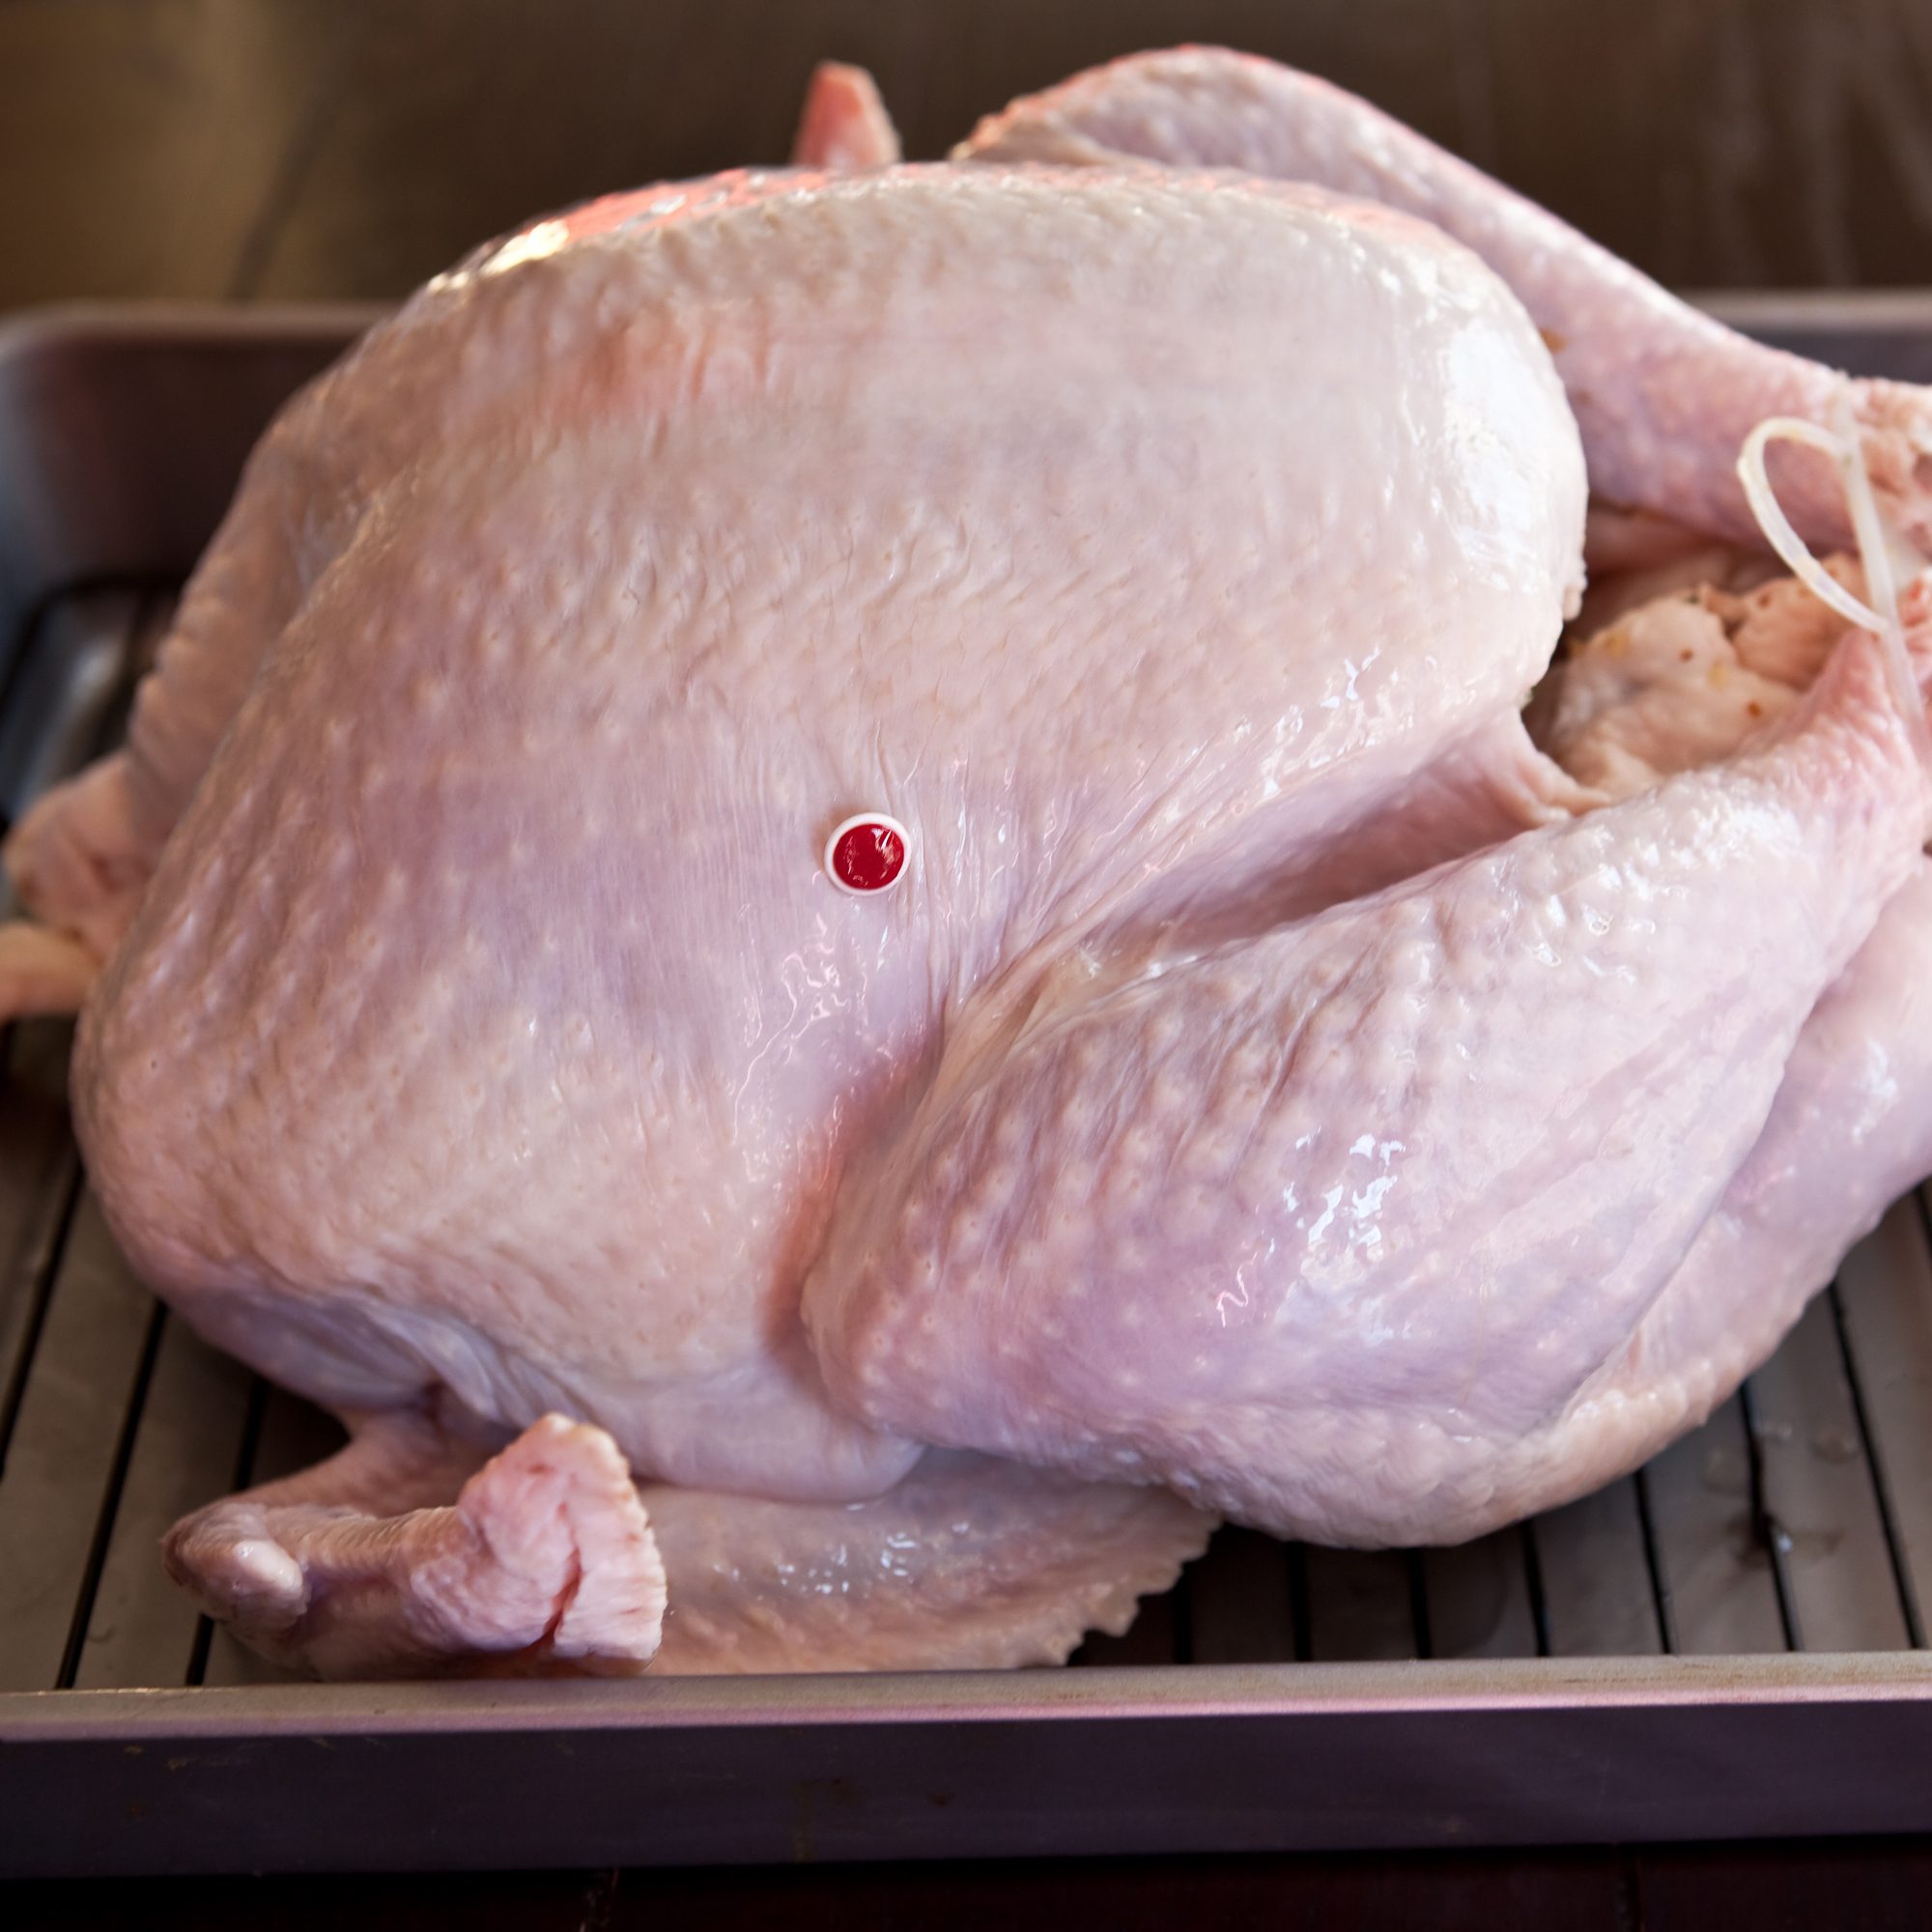 https://www.tasteofhome.com/wp-content/uploads/2020/10/turkey-with-timer-GettyImages-174935950.jpg?fit=700%2C700